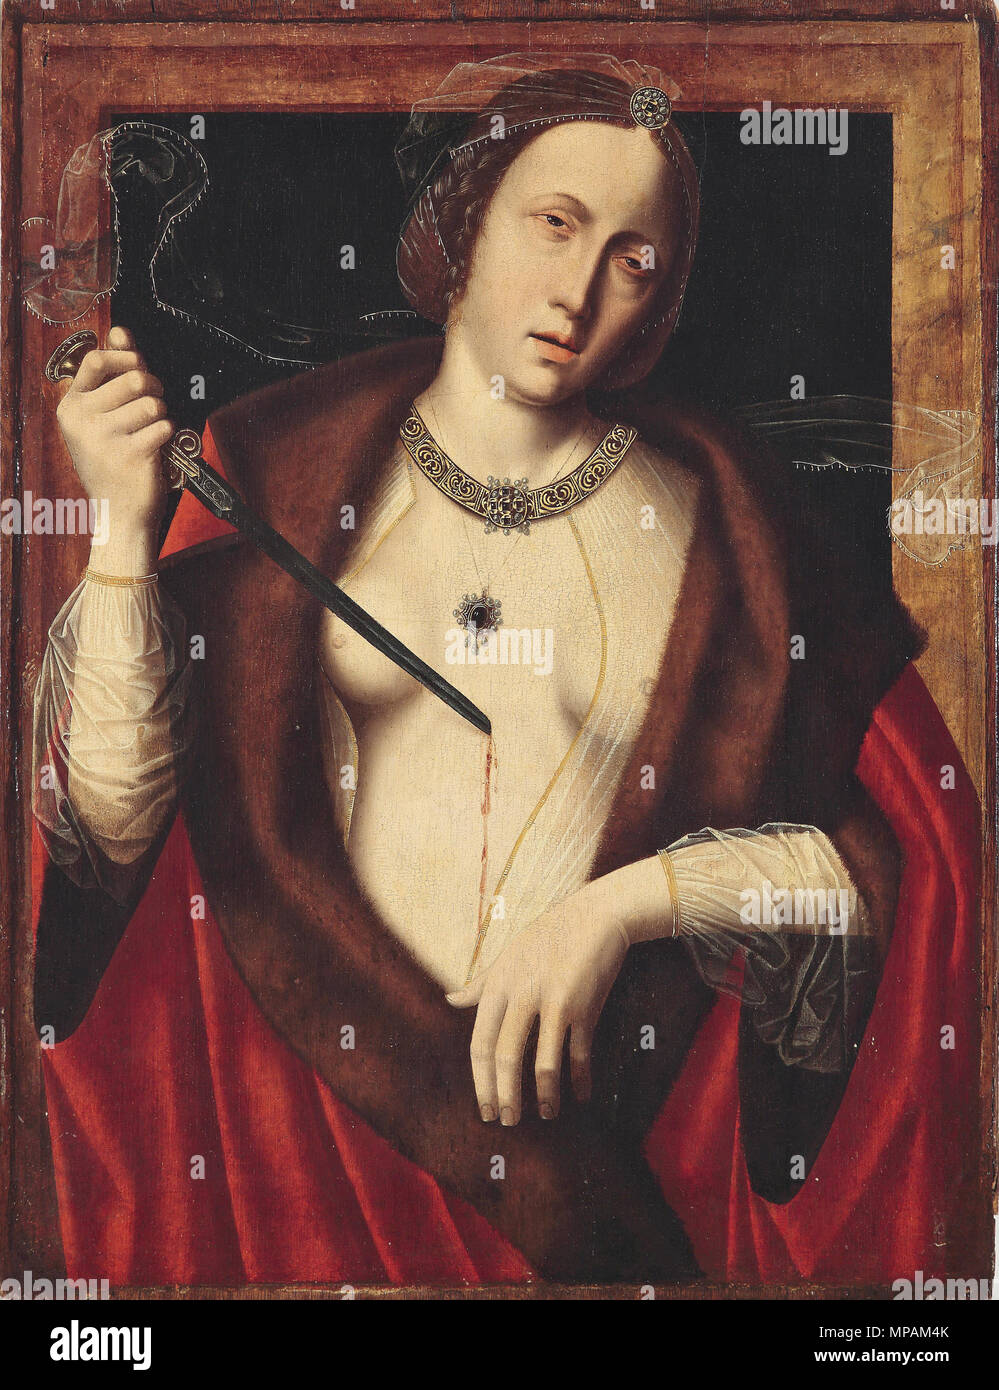 . Lukretia . circa 1530.    Master of the Holy Blood  (fl. between 1500 and 1520)     Description Flemish painter and draughtsman  Date of birth/death 1530s  Work period between 1500 and 1520  Work location Bruges  Authority control  : Q1918545 VIAF: 18434946 ULAN: 500030845 WGA: MASTER of the Holy Blood GND: 134188225 RKD: 53589 881 Meister des Heiligen Blutes Lukretia Stock Photo